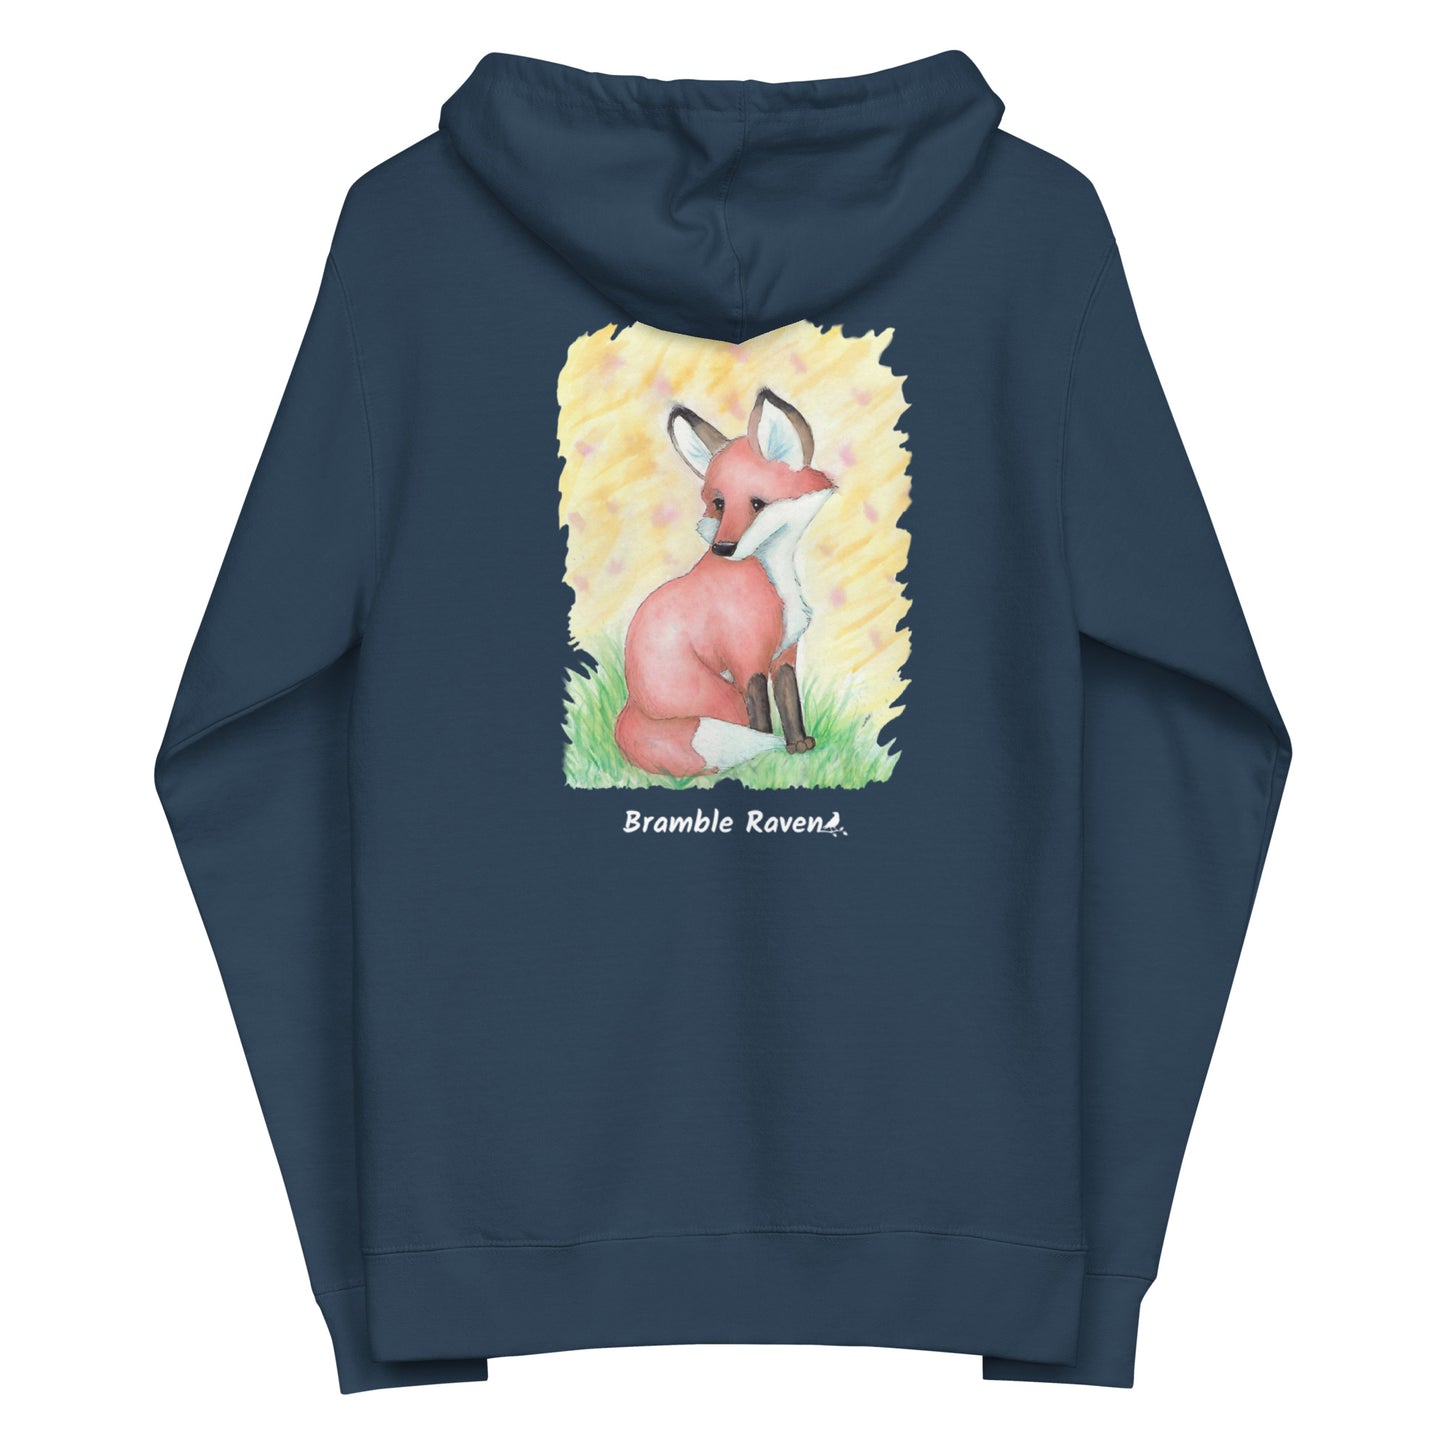 Unisex navy blue colored zip-up fleece-lined hoodie. Features original watercolor painting of a fox sitting in the grass on the back of the hoodie.